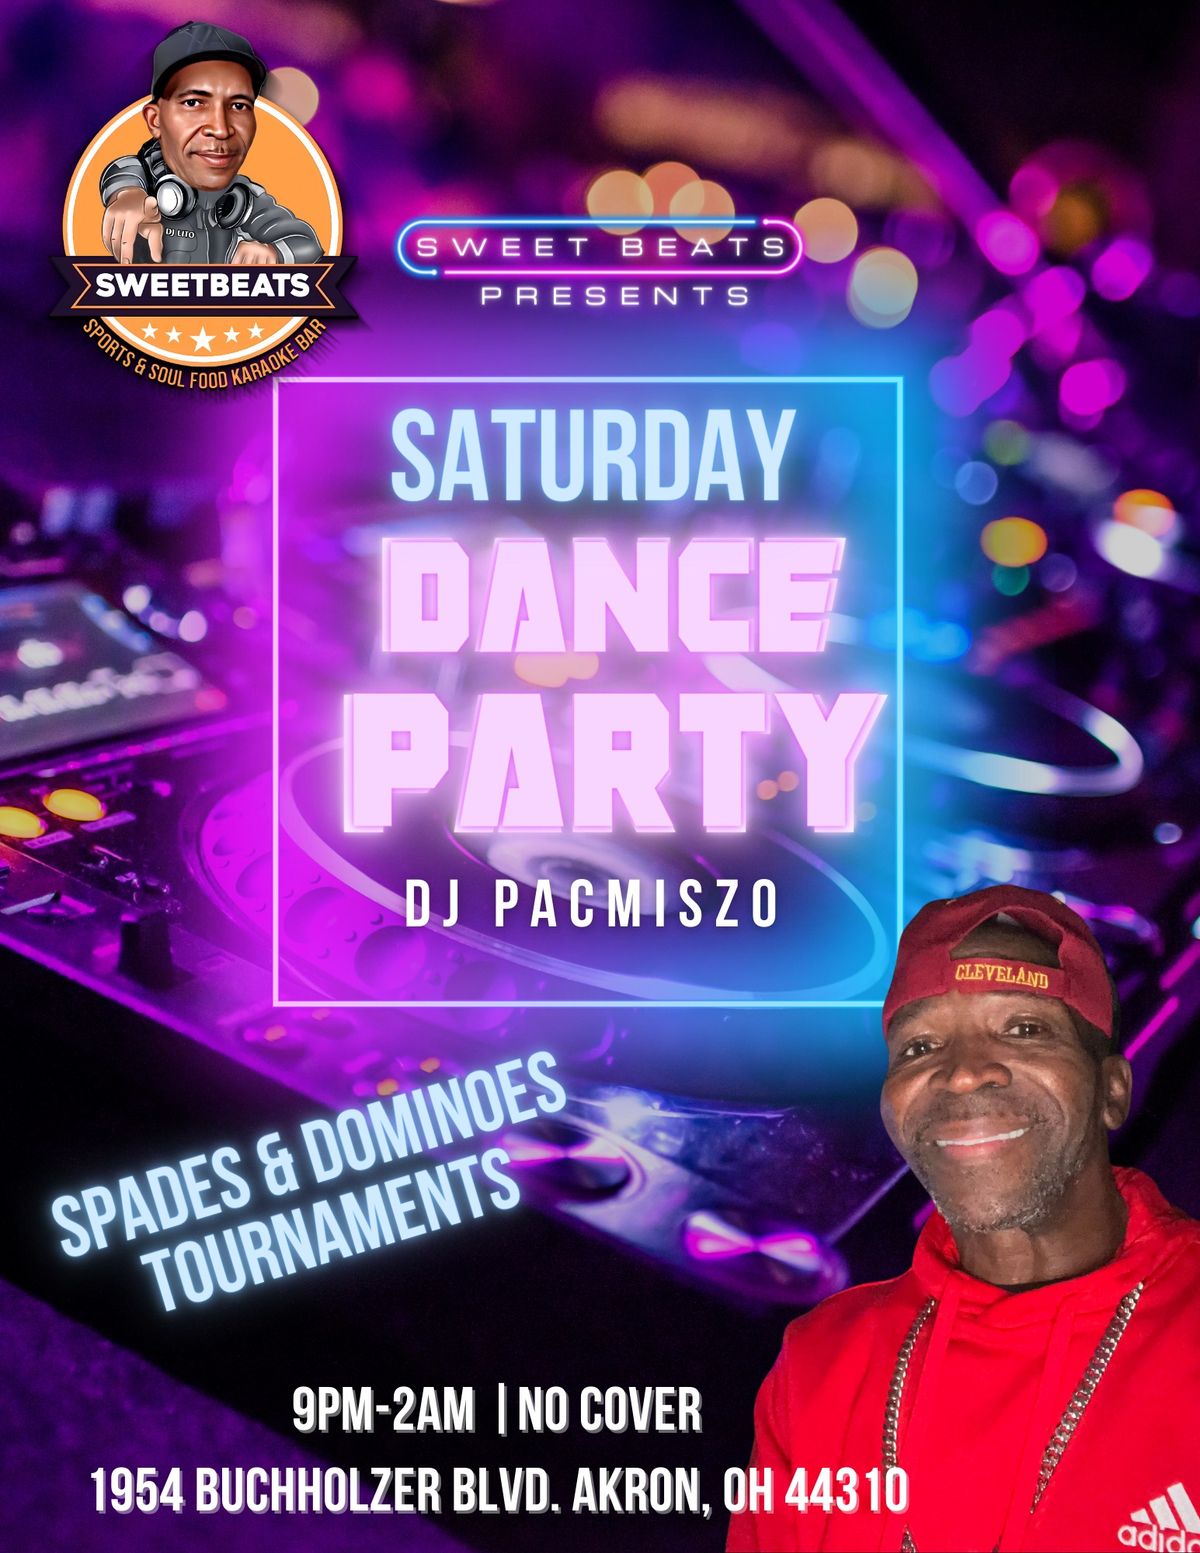 PARTY WITH DJ PAC 8:30-2:30